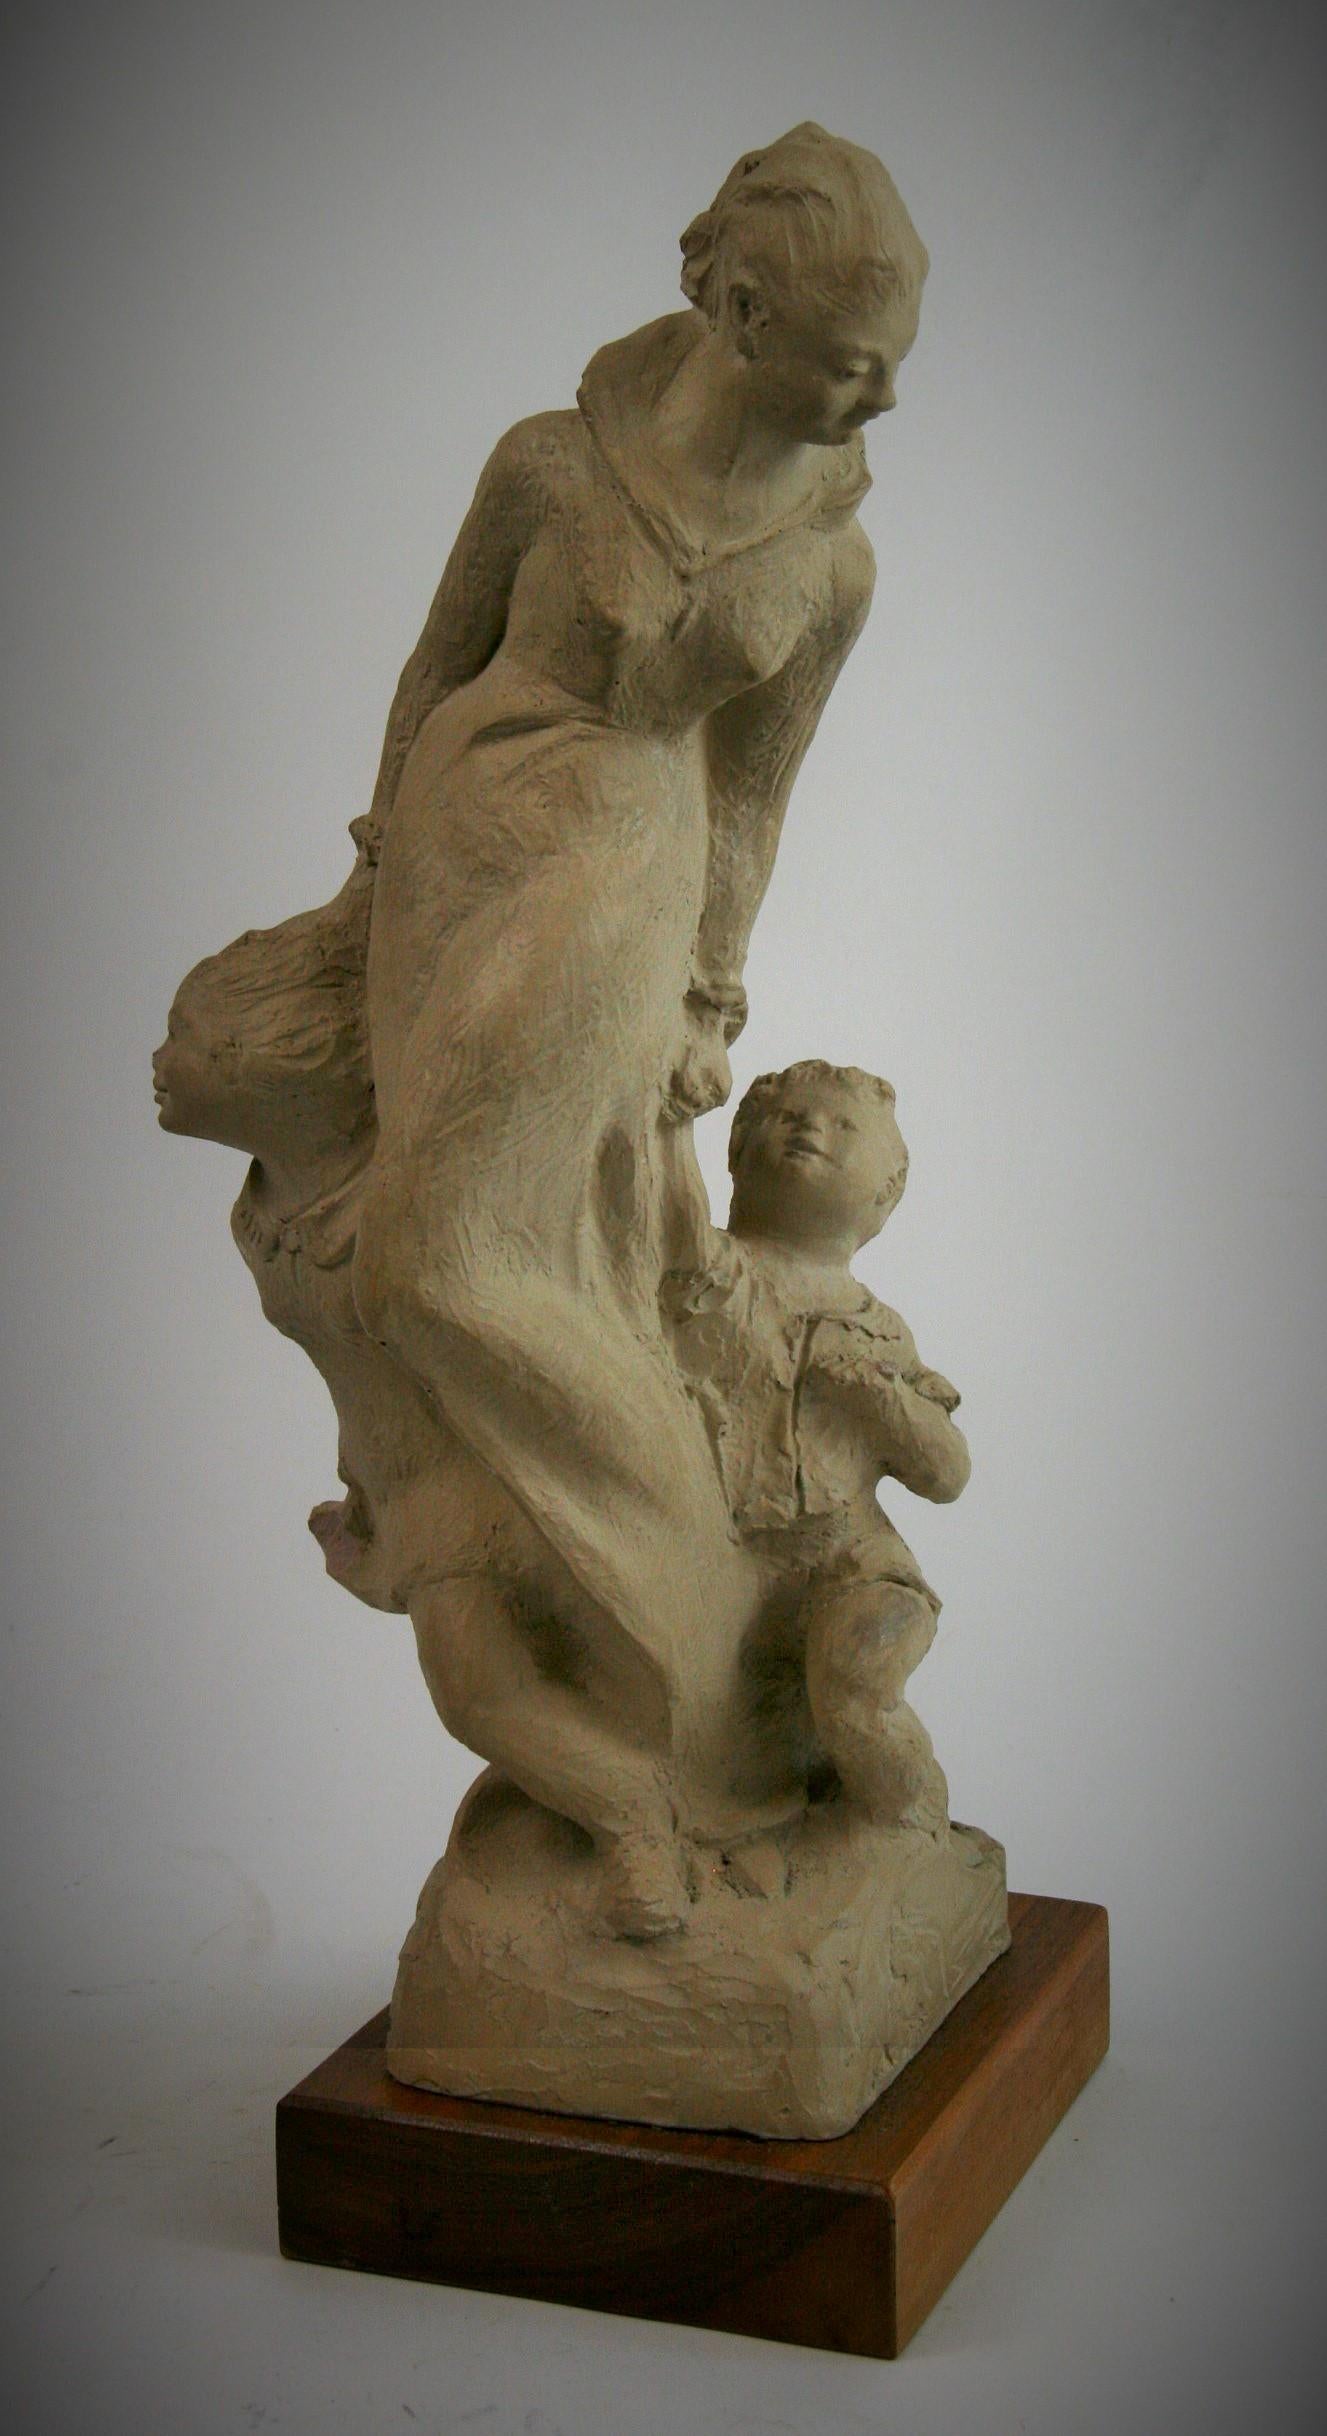 2-295 mother with 2 small children cast stone figurative sculpture on walnut wood base
Austin Productions 1983.